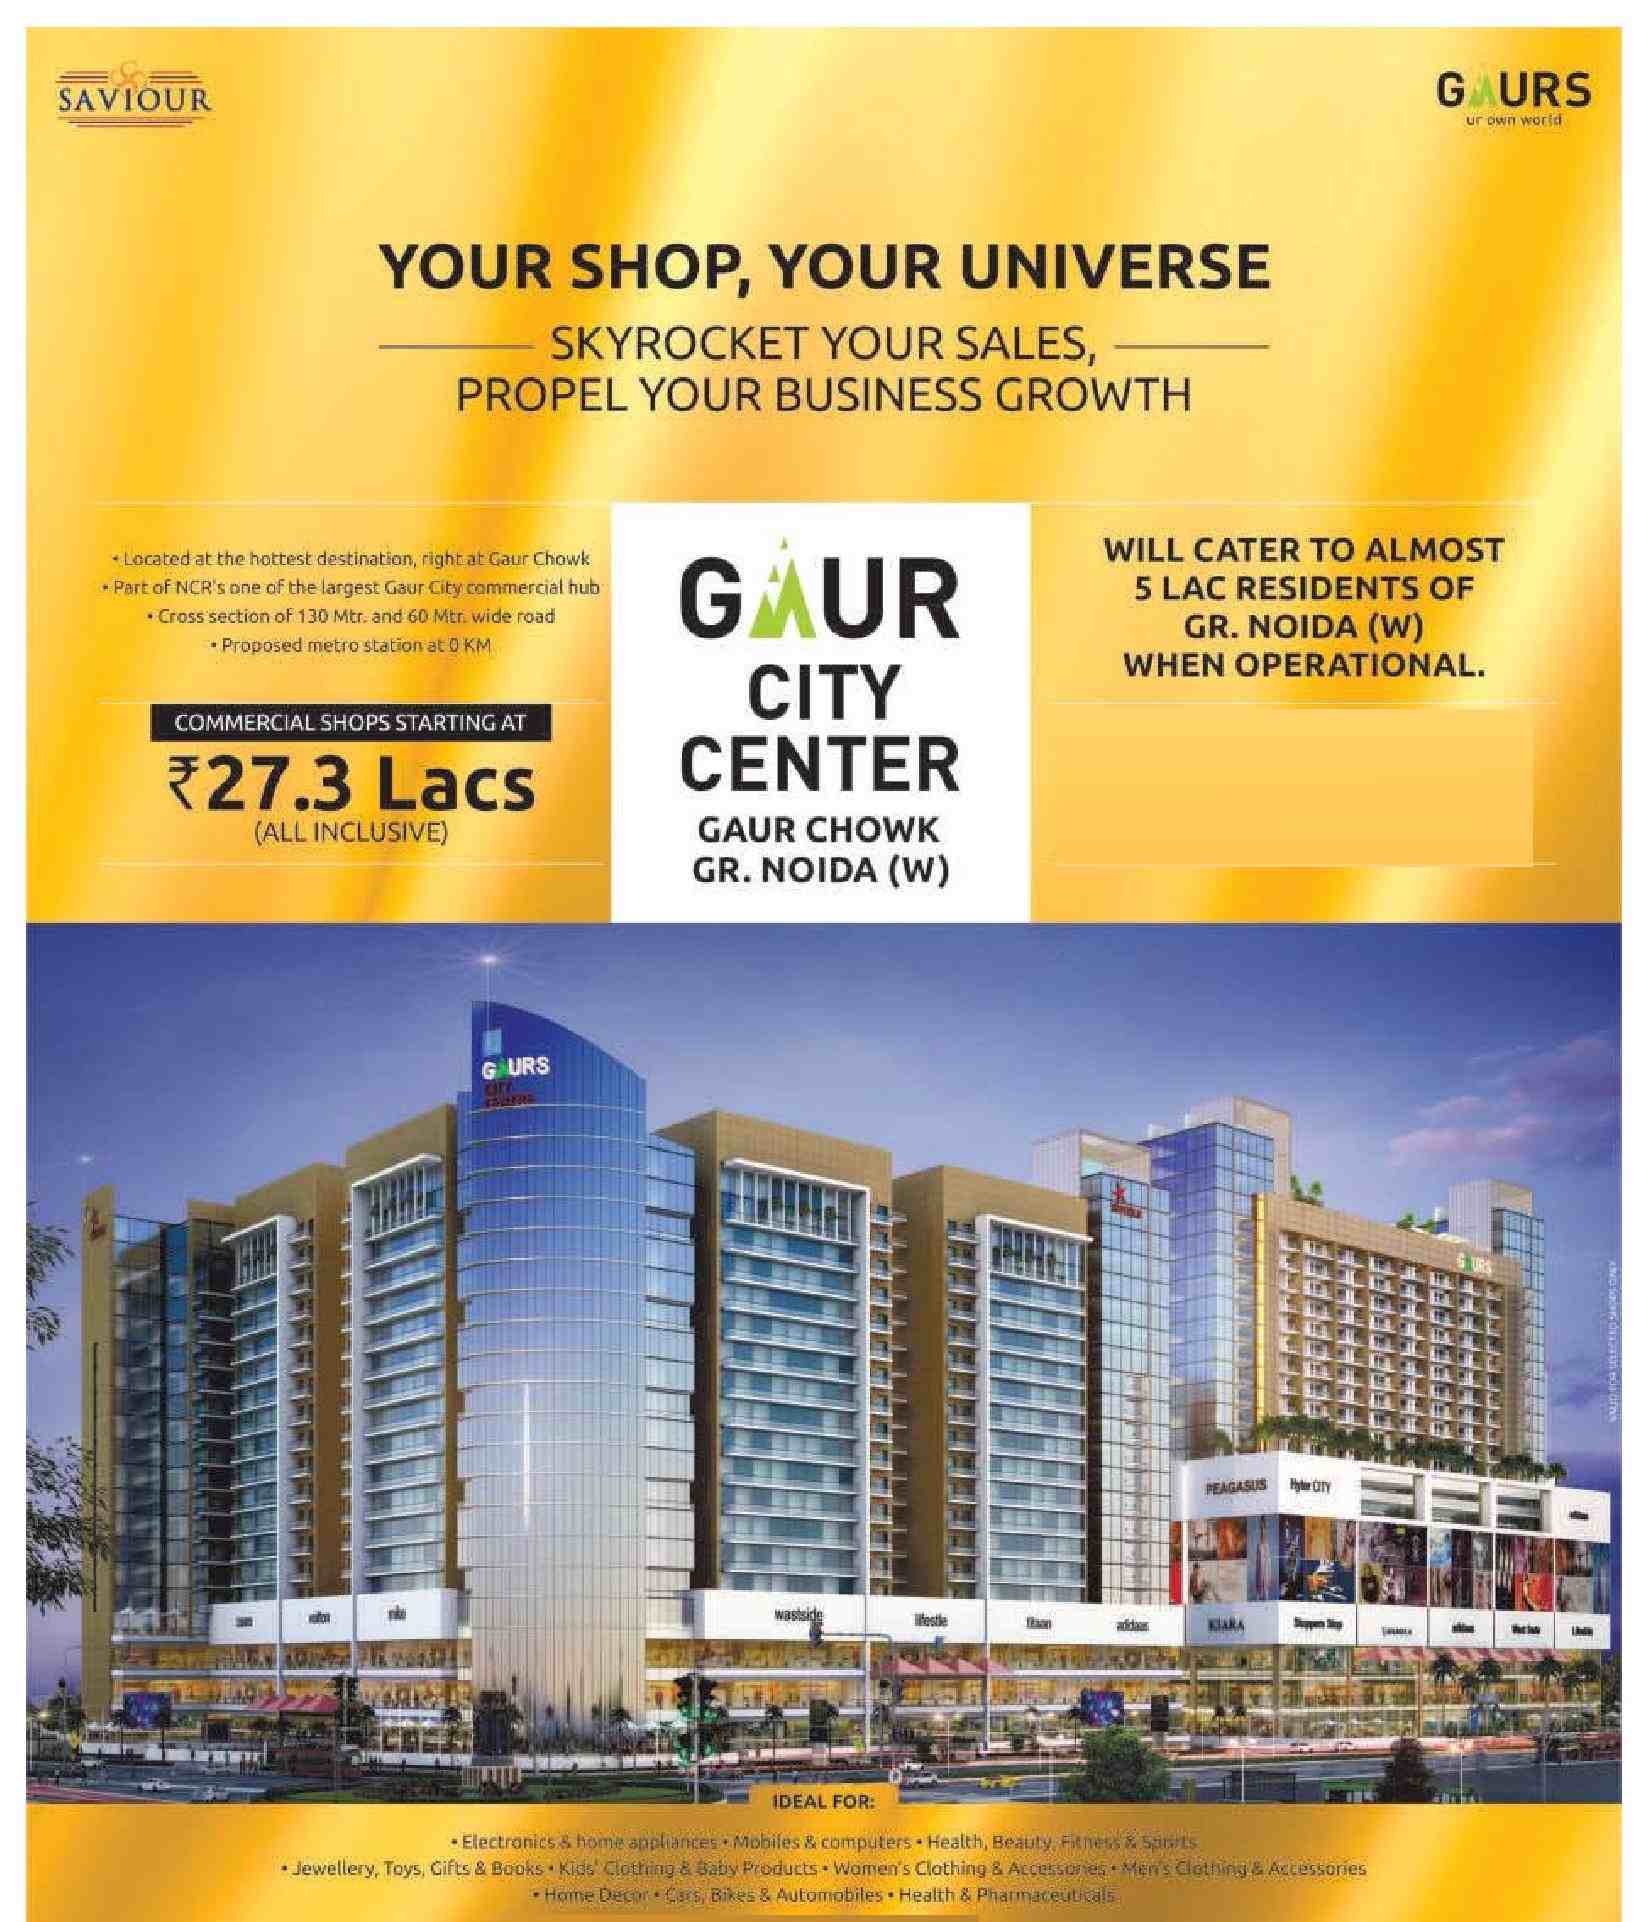 Skyrocket your sales and propel your business growth at Gaur City Center in Greater Noida Update